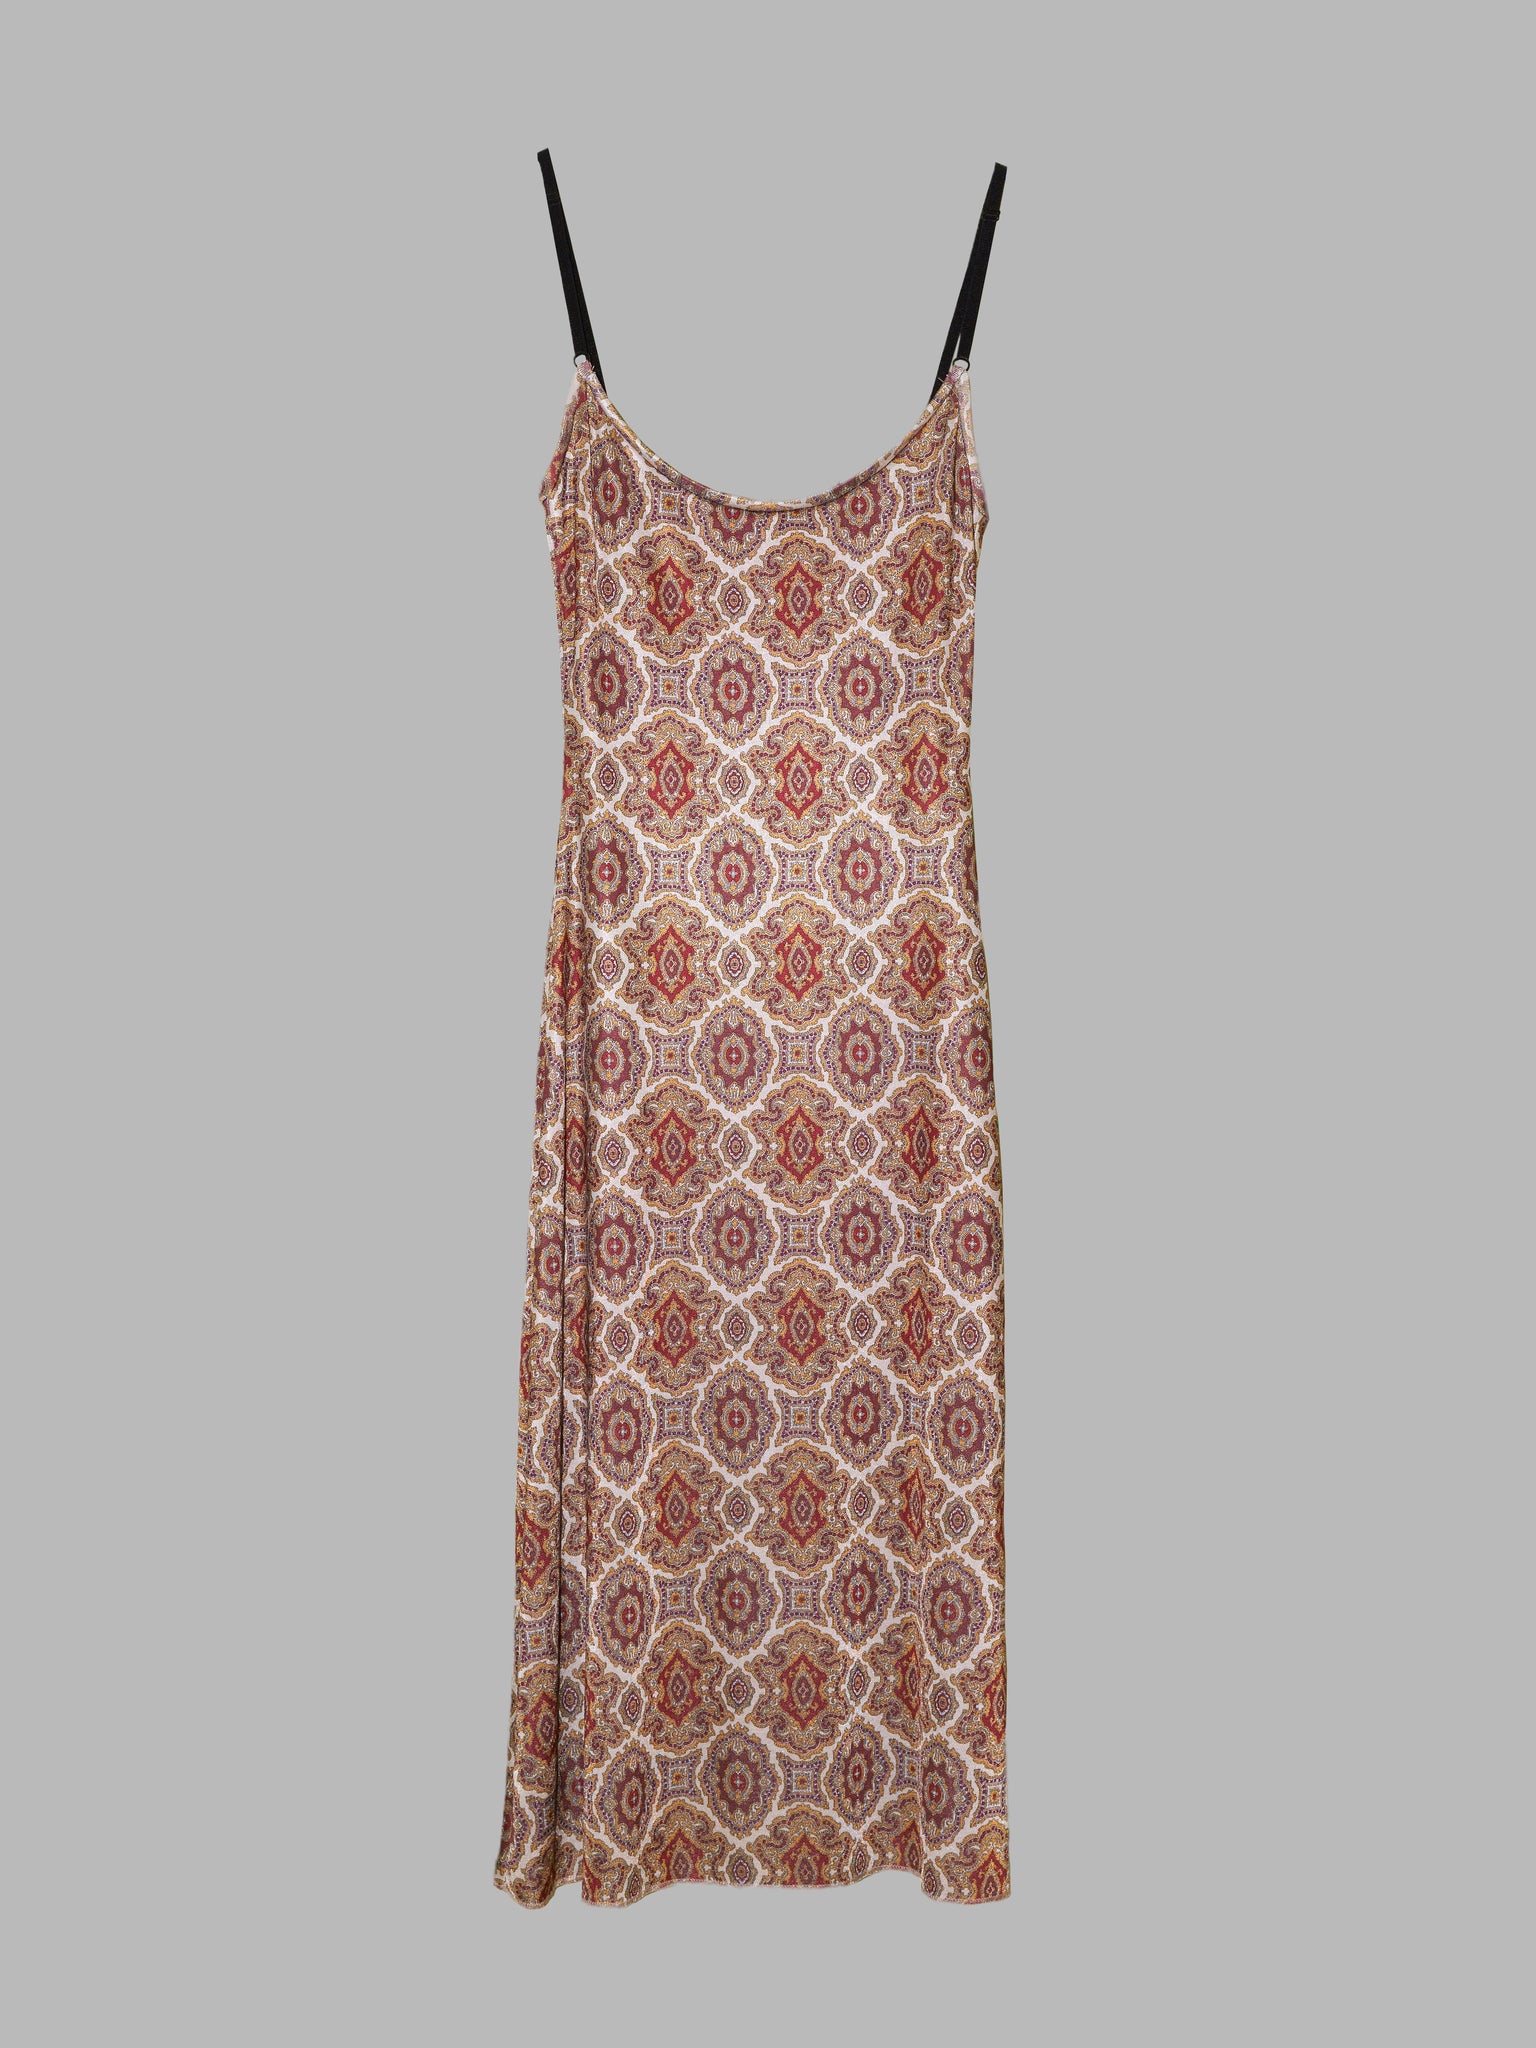 Jean Colonna 1990s stretch polyester paisley slip dress with adjustable straps